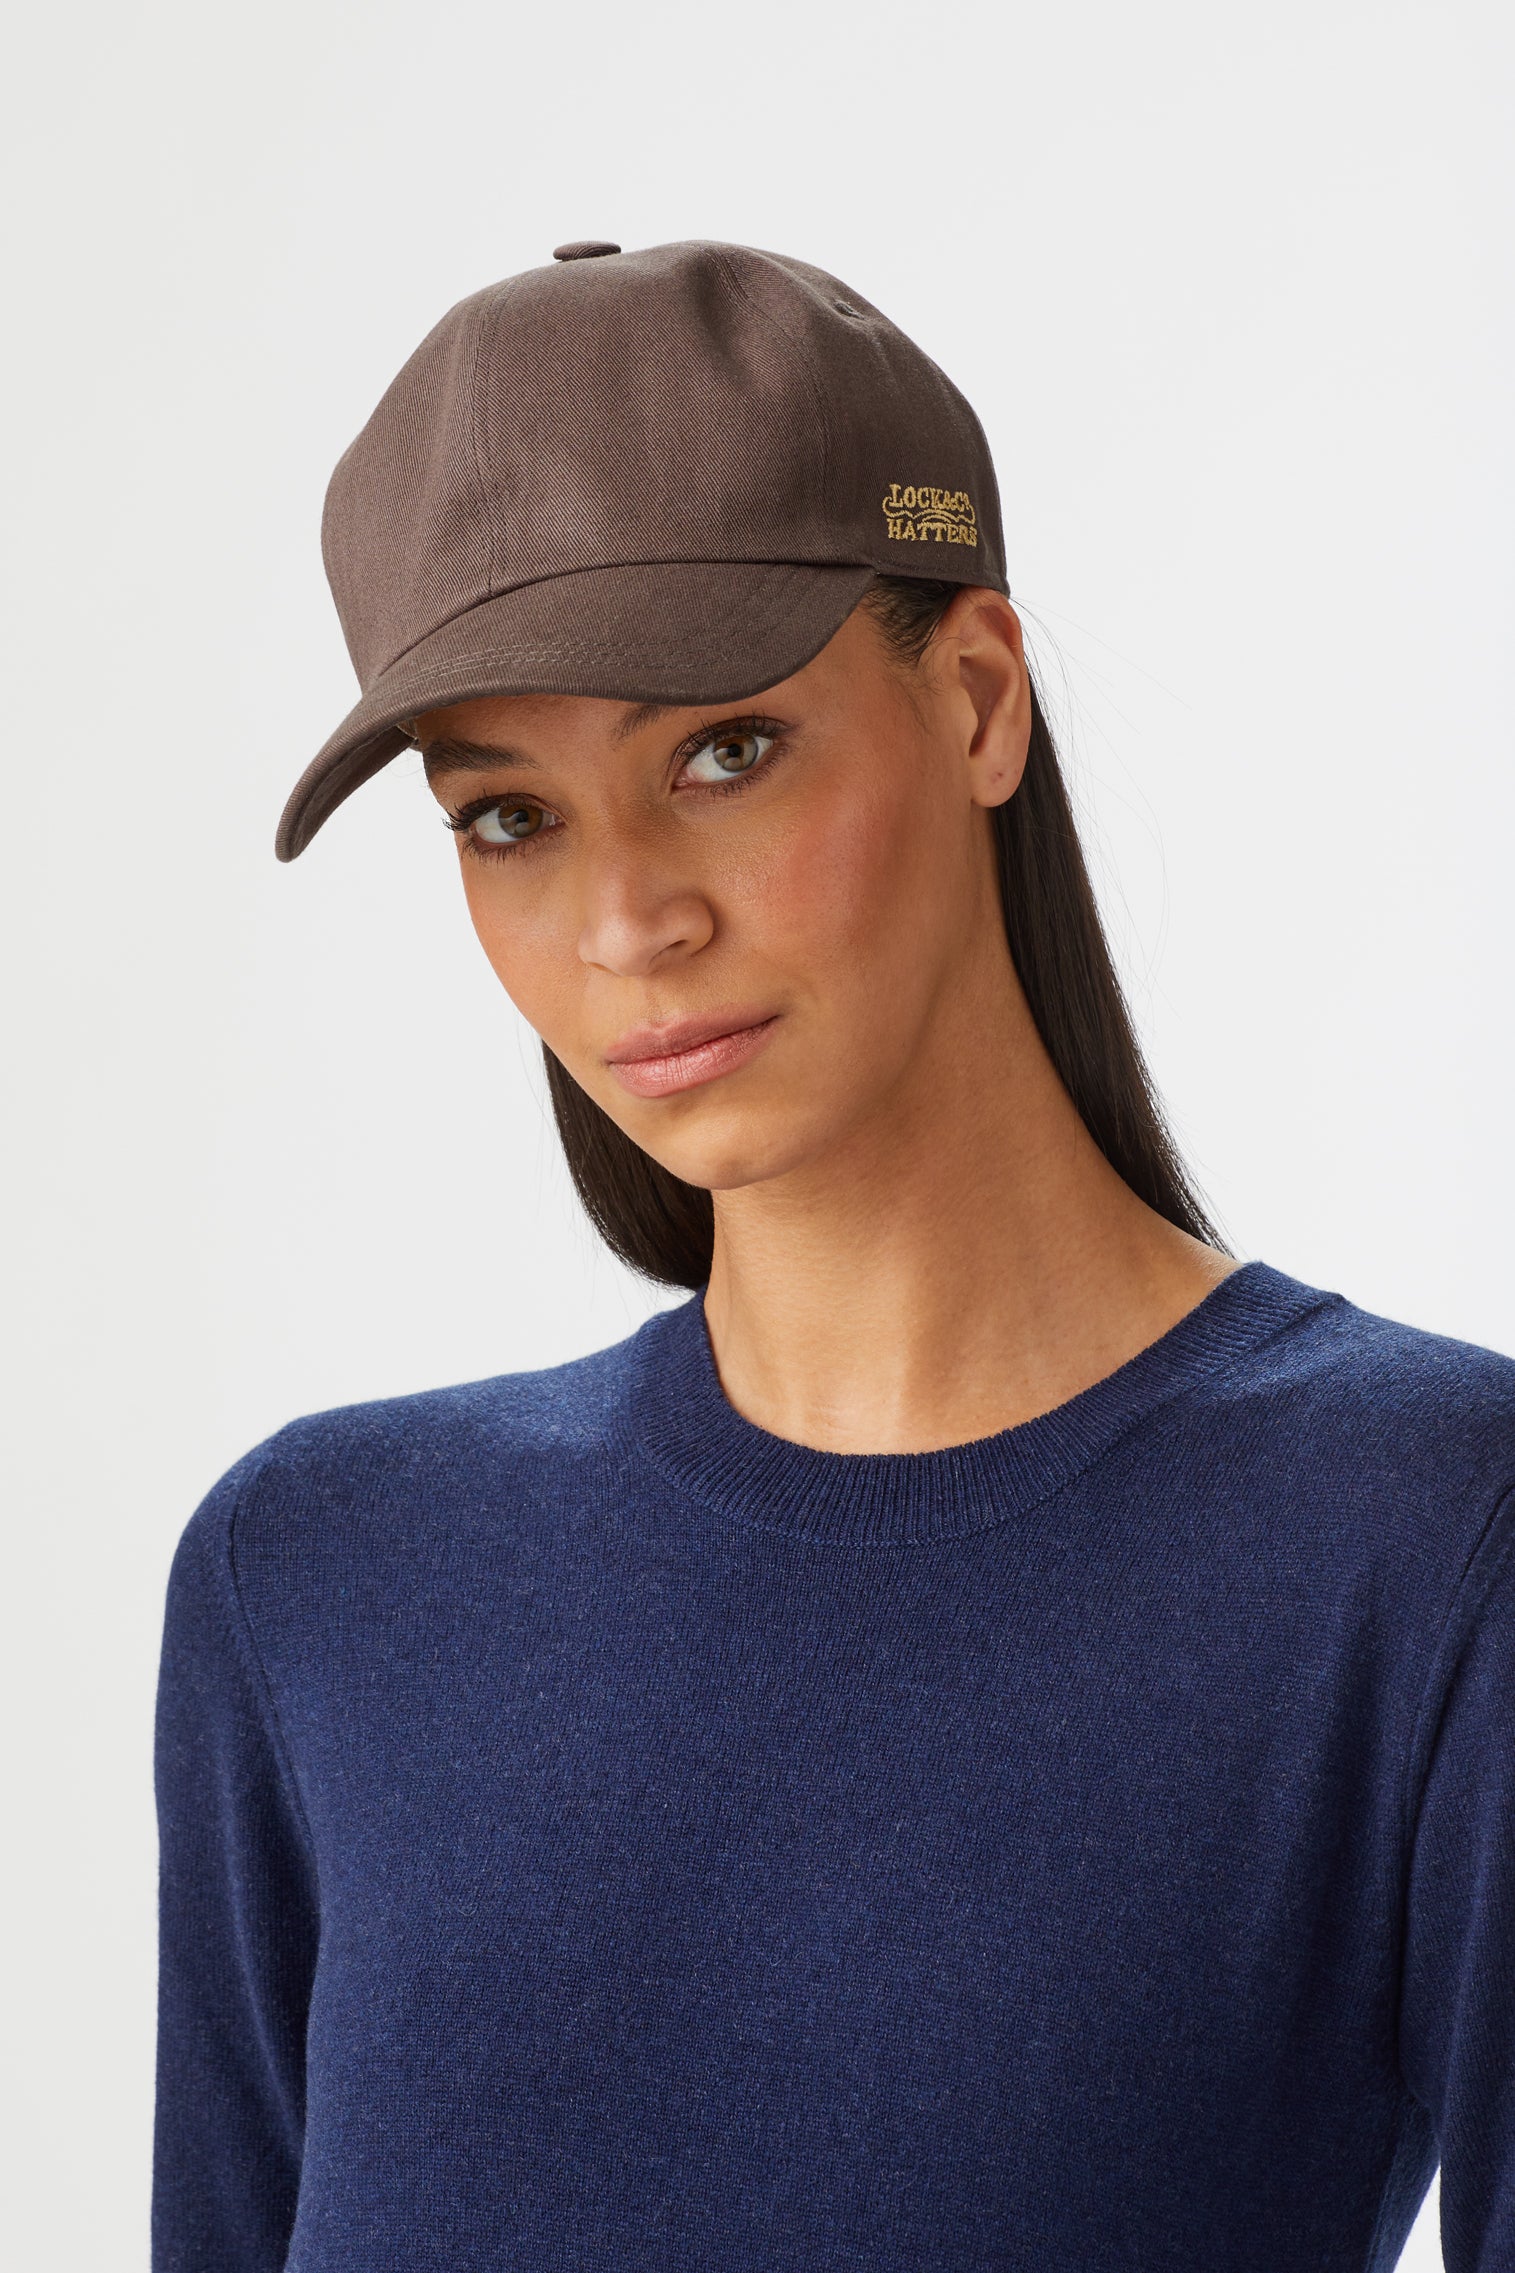 Adjustable Brown Baseball Cap - Products - Lock & Co. Hatters London UK